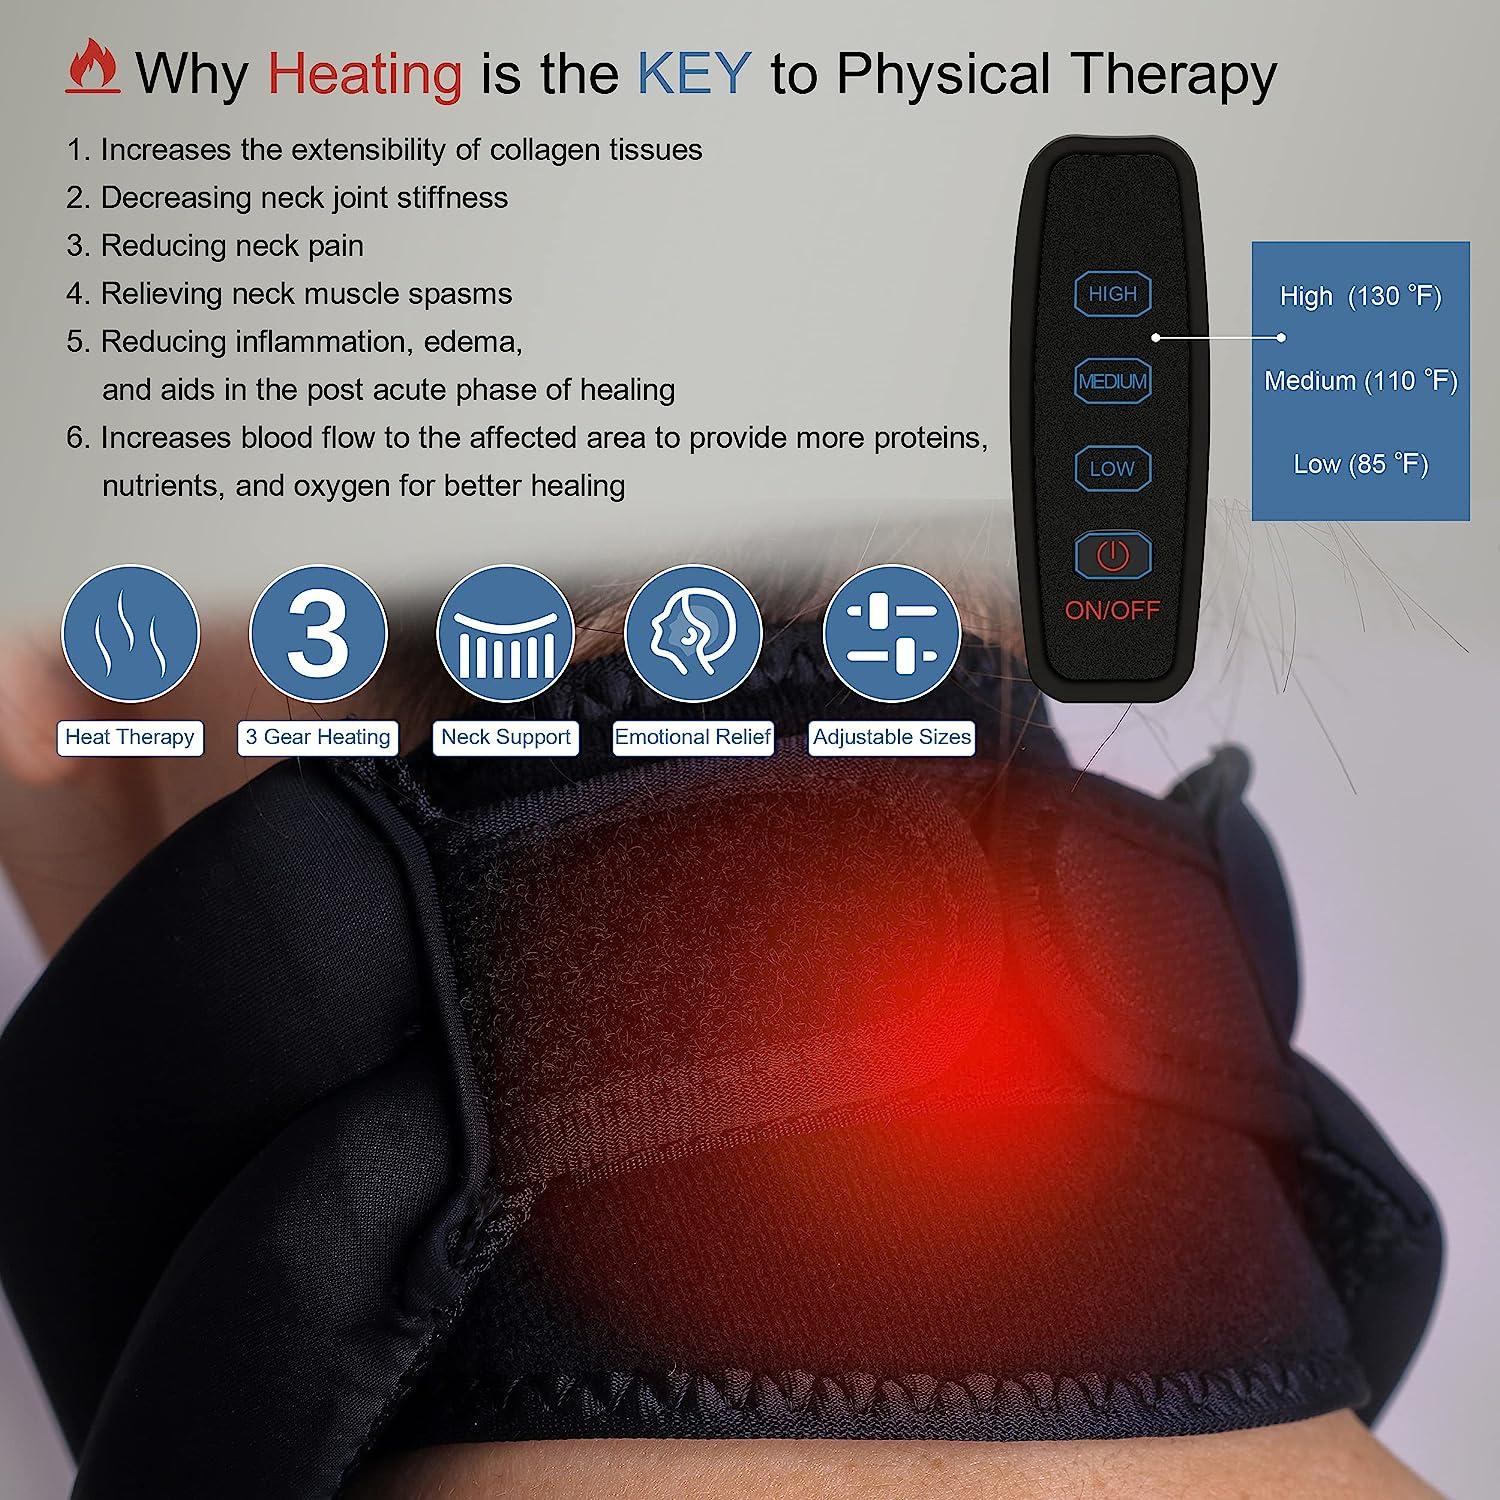 Heated Neck Brace for Neck Pain Relief, Neck Support Brace